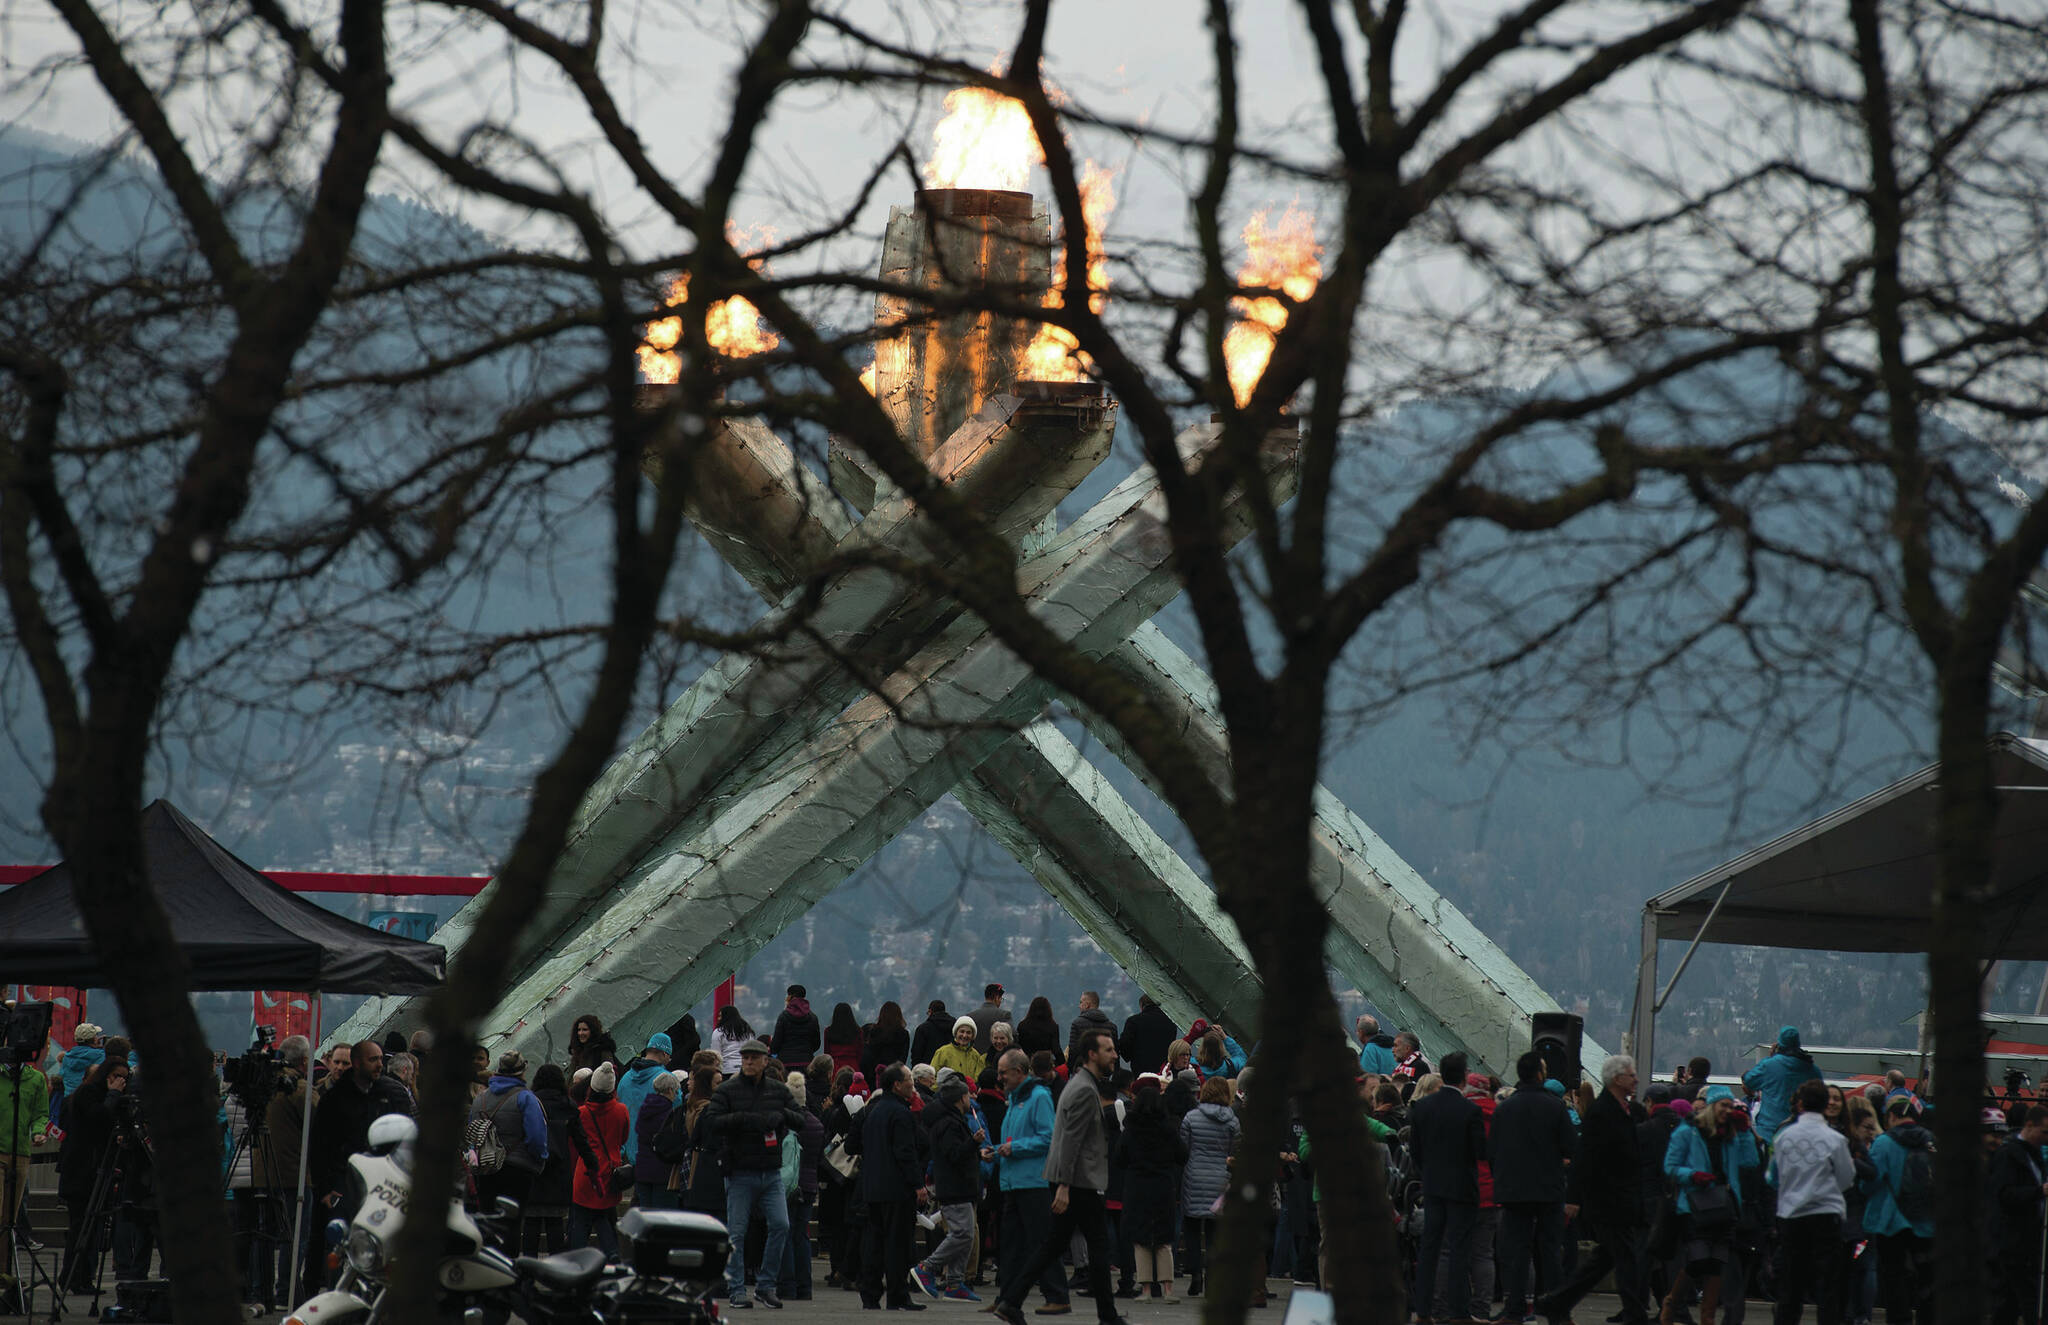 The flames from the Olympic Caldron are framed through trees after being relit in downtown Vancouver, Wednesday, February, 12, 2020. The flame was relit as a part of a 10 year celebration of the Vancouver 2010 winter Olympics. THE CANADIAN PRESS/Jonathan Hayward